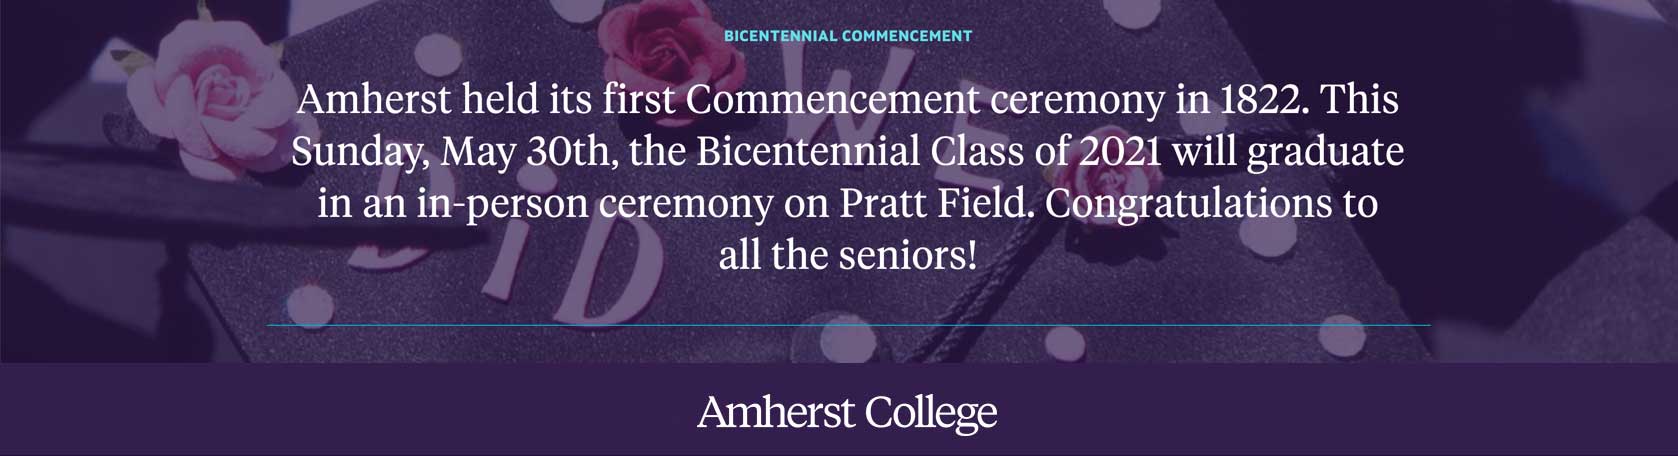 Bicentennial fact: First commencement ceremony at Amherst College was in 1822